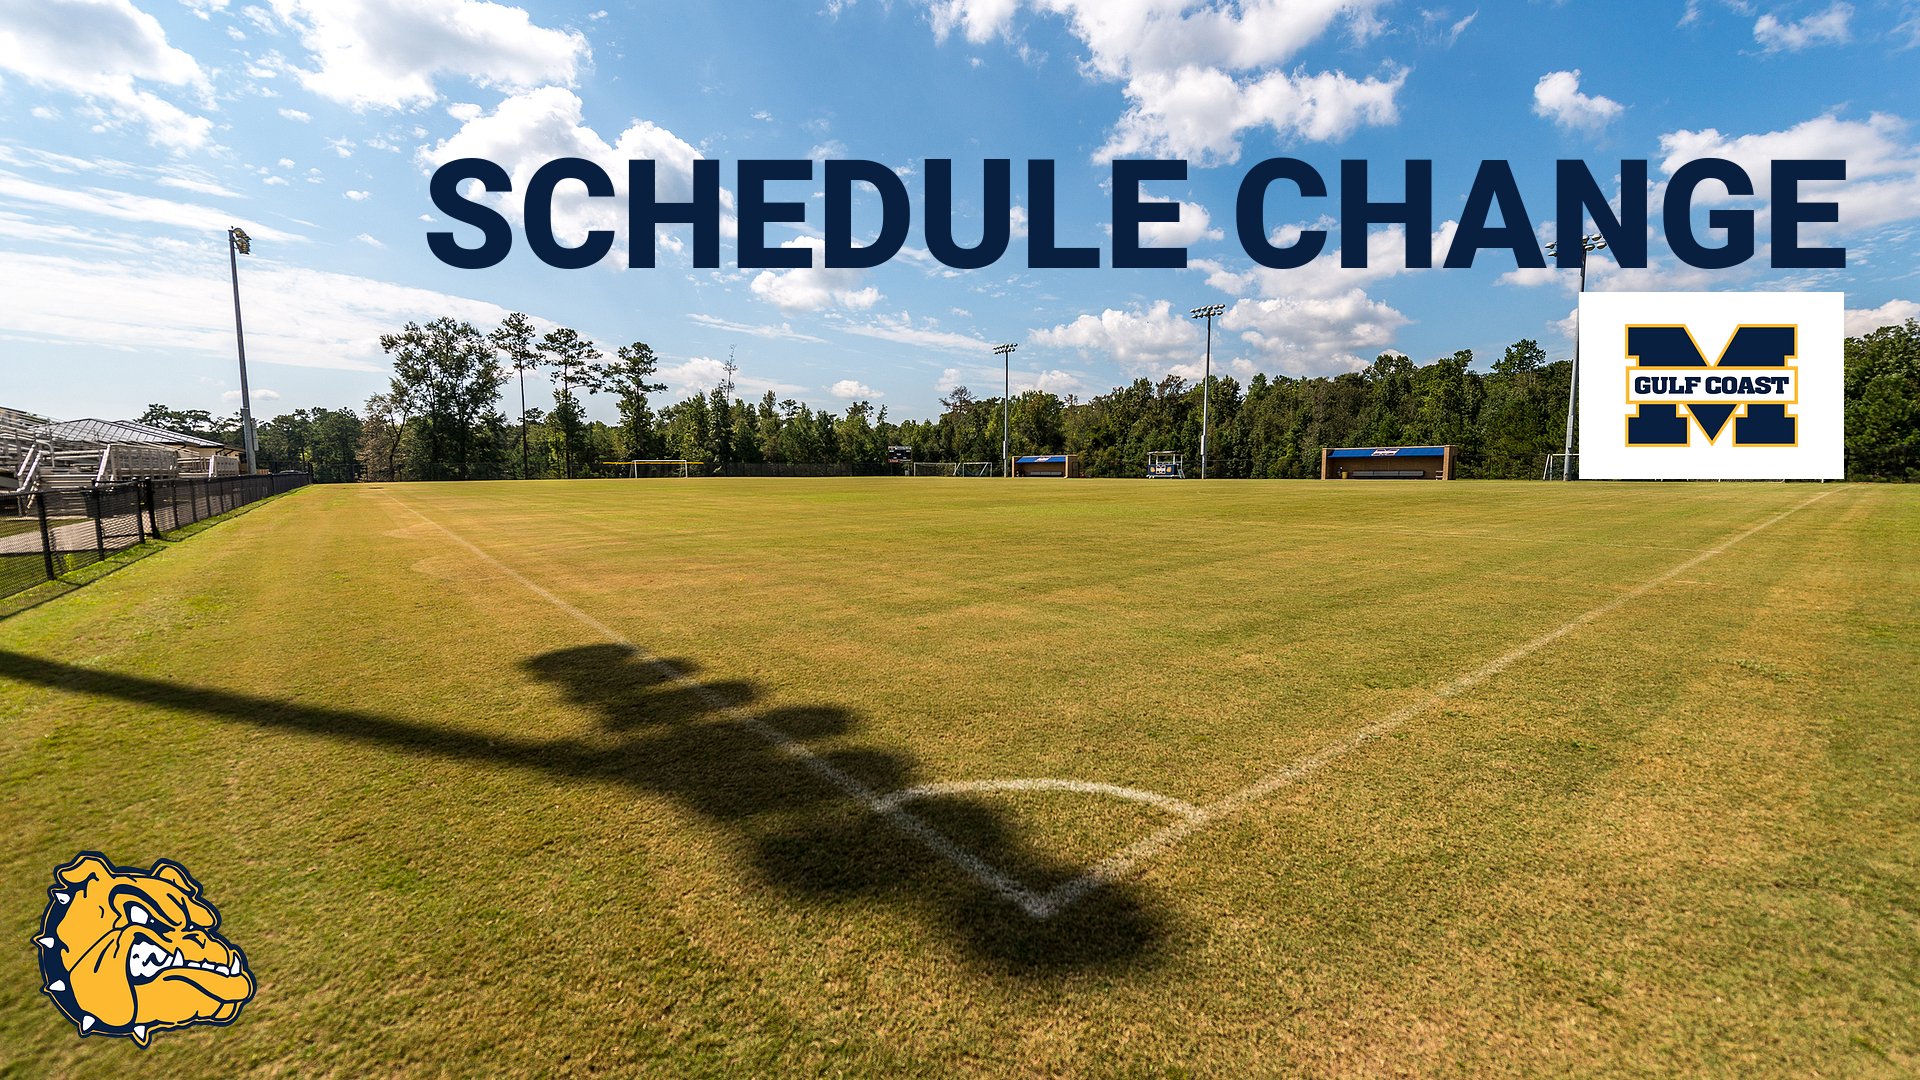 Schedules changed for soccer at Meridian